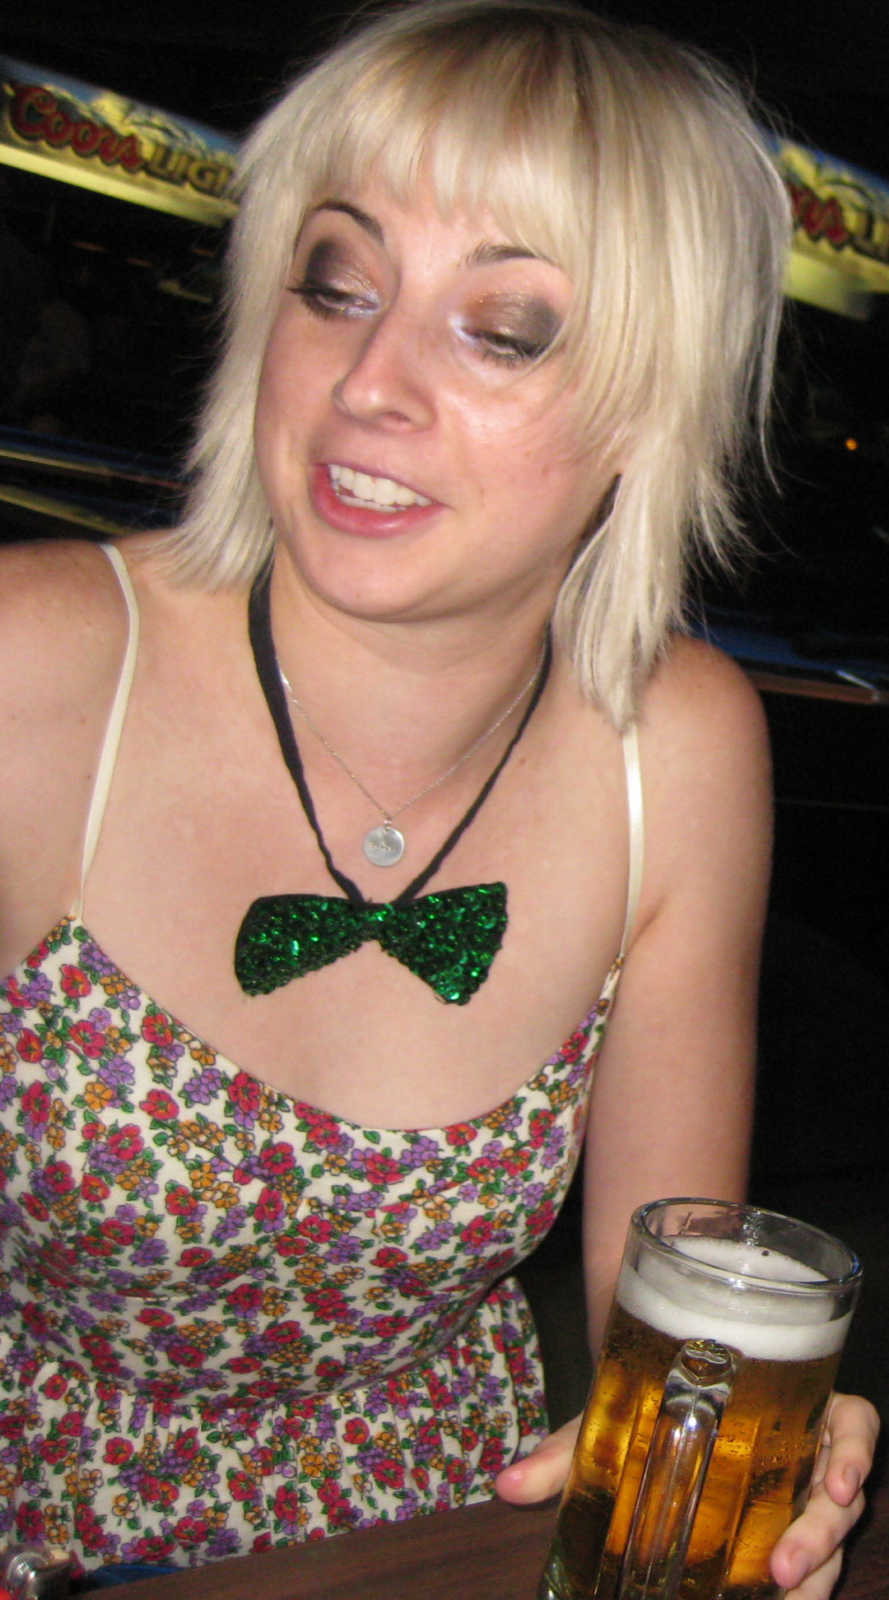 Woman with blonde pixie cut takes a candid photo while out partying